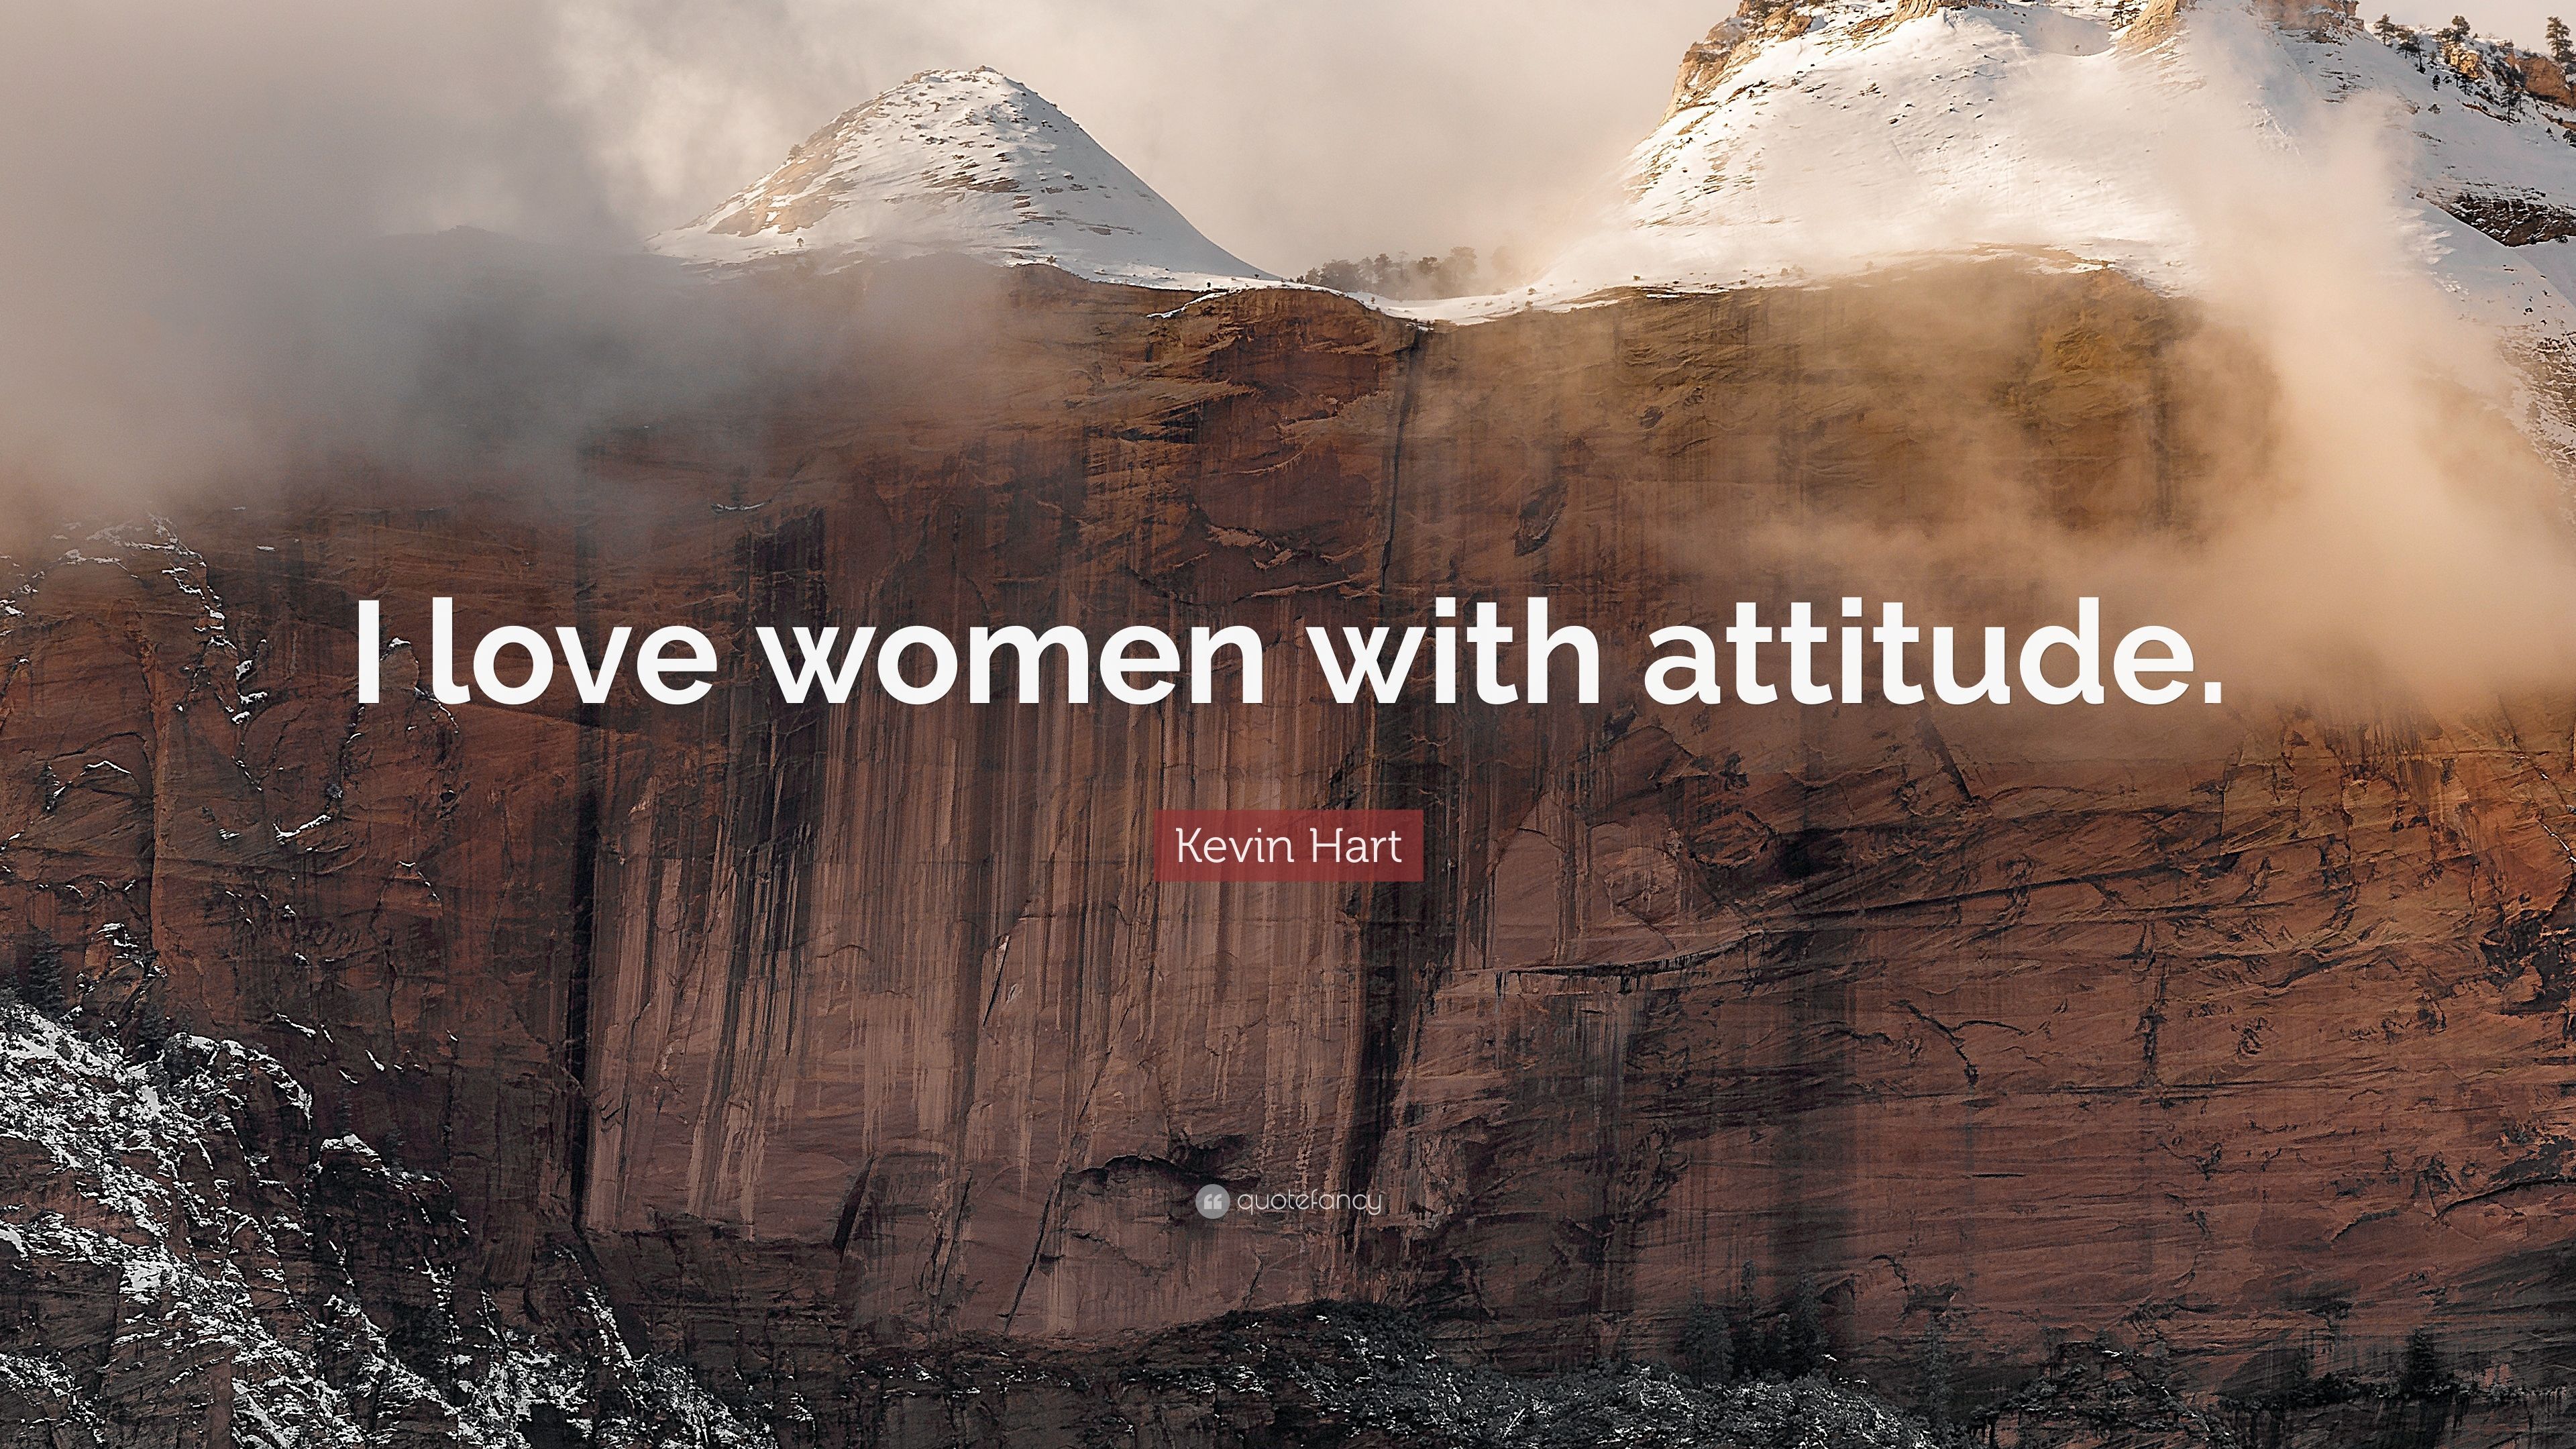 Kevin Hart Quote: “I love women with attitude.” 7 wallpaper